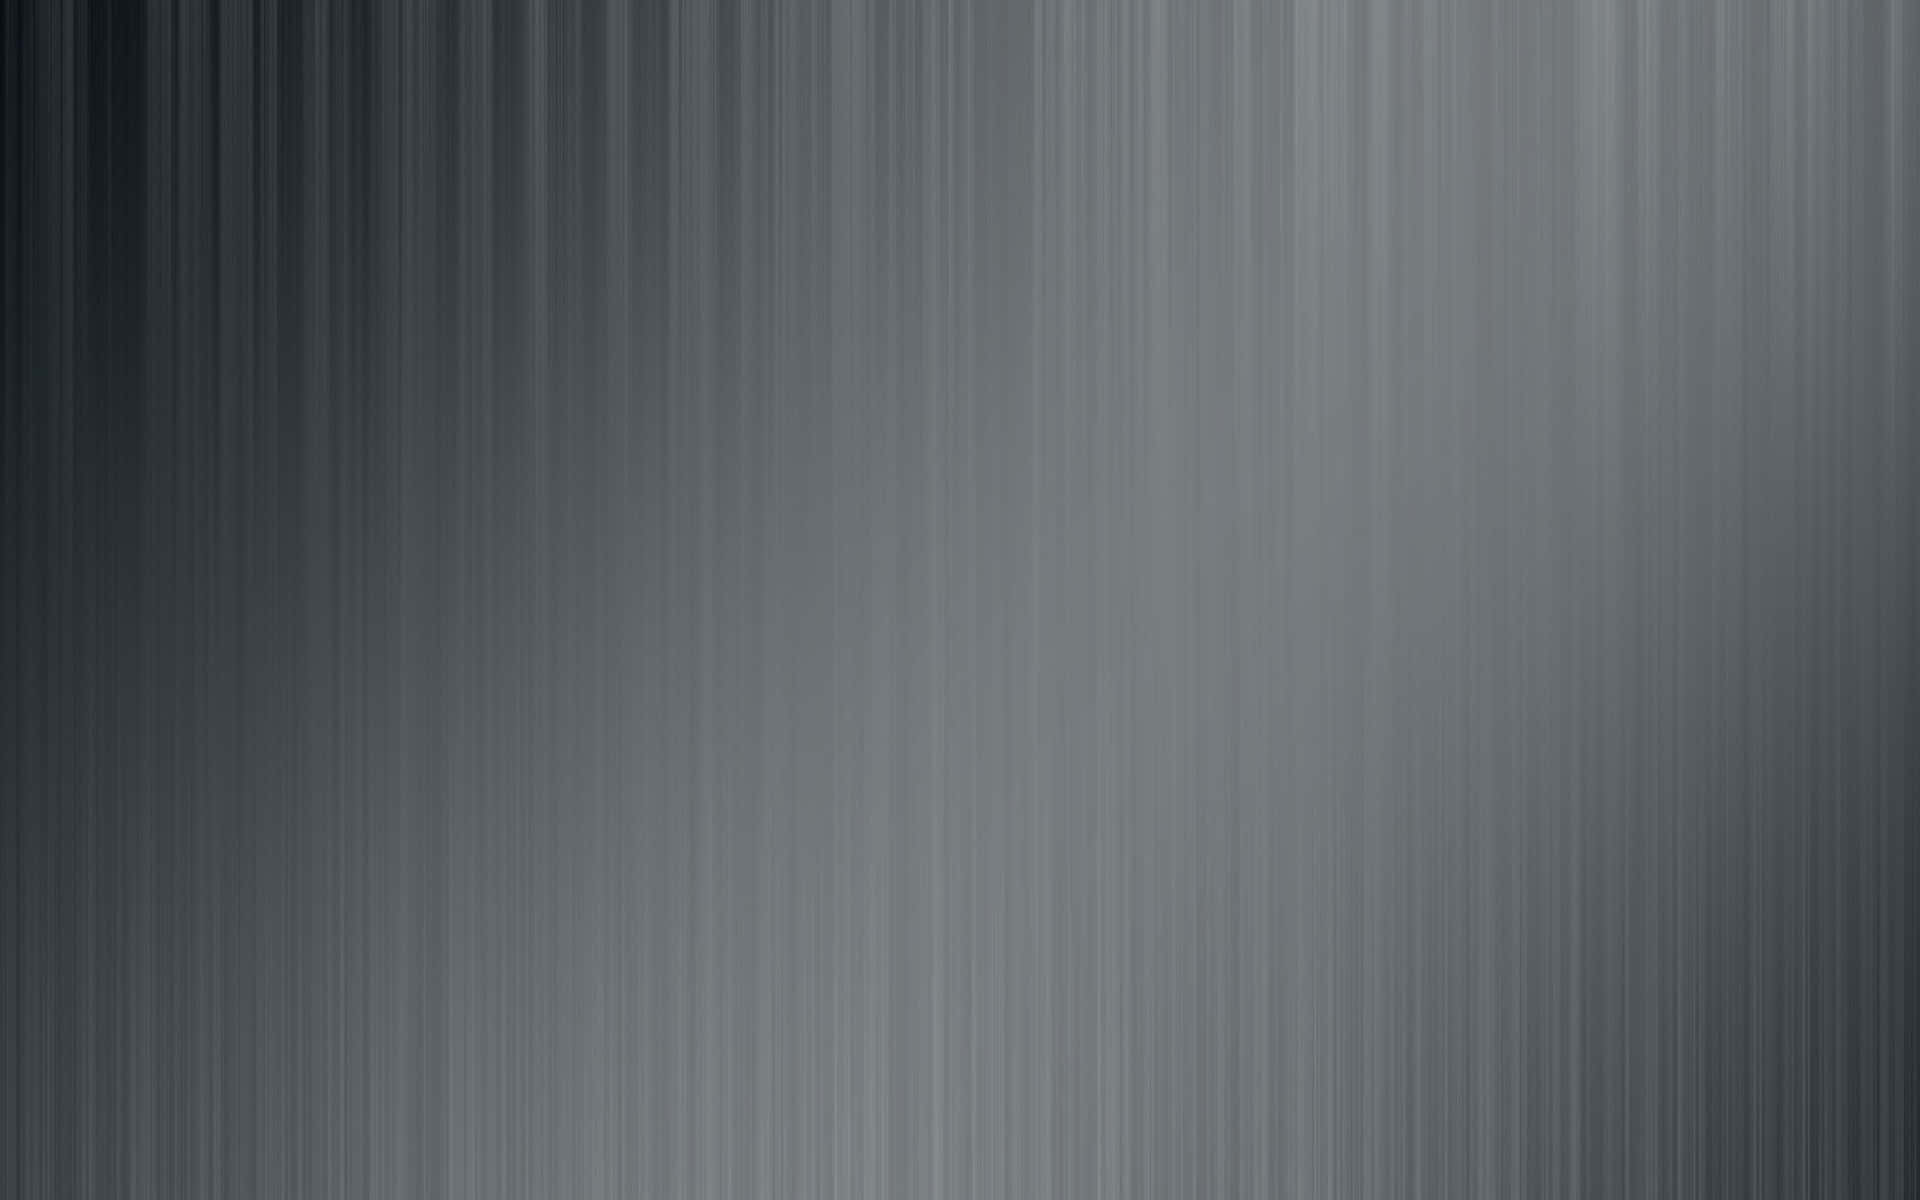 A Black And White Background With A Horizontal Line